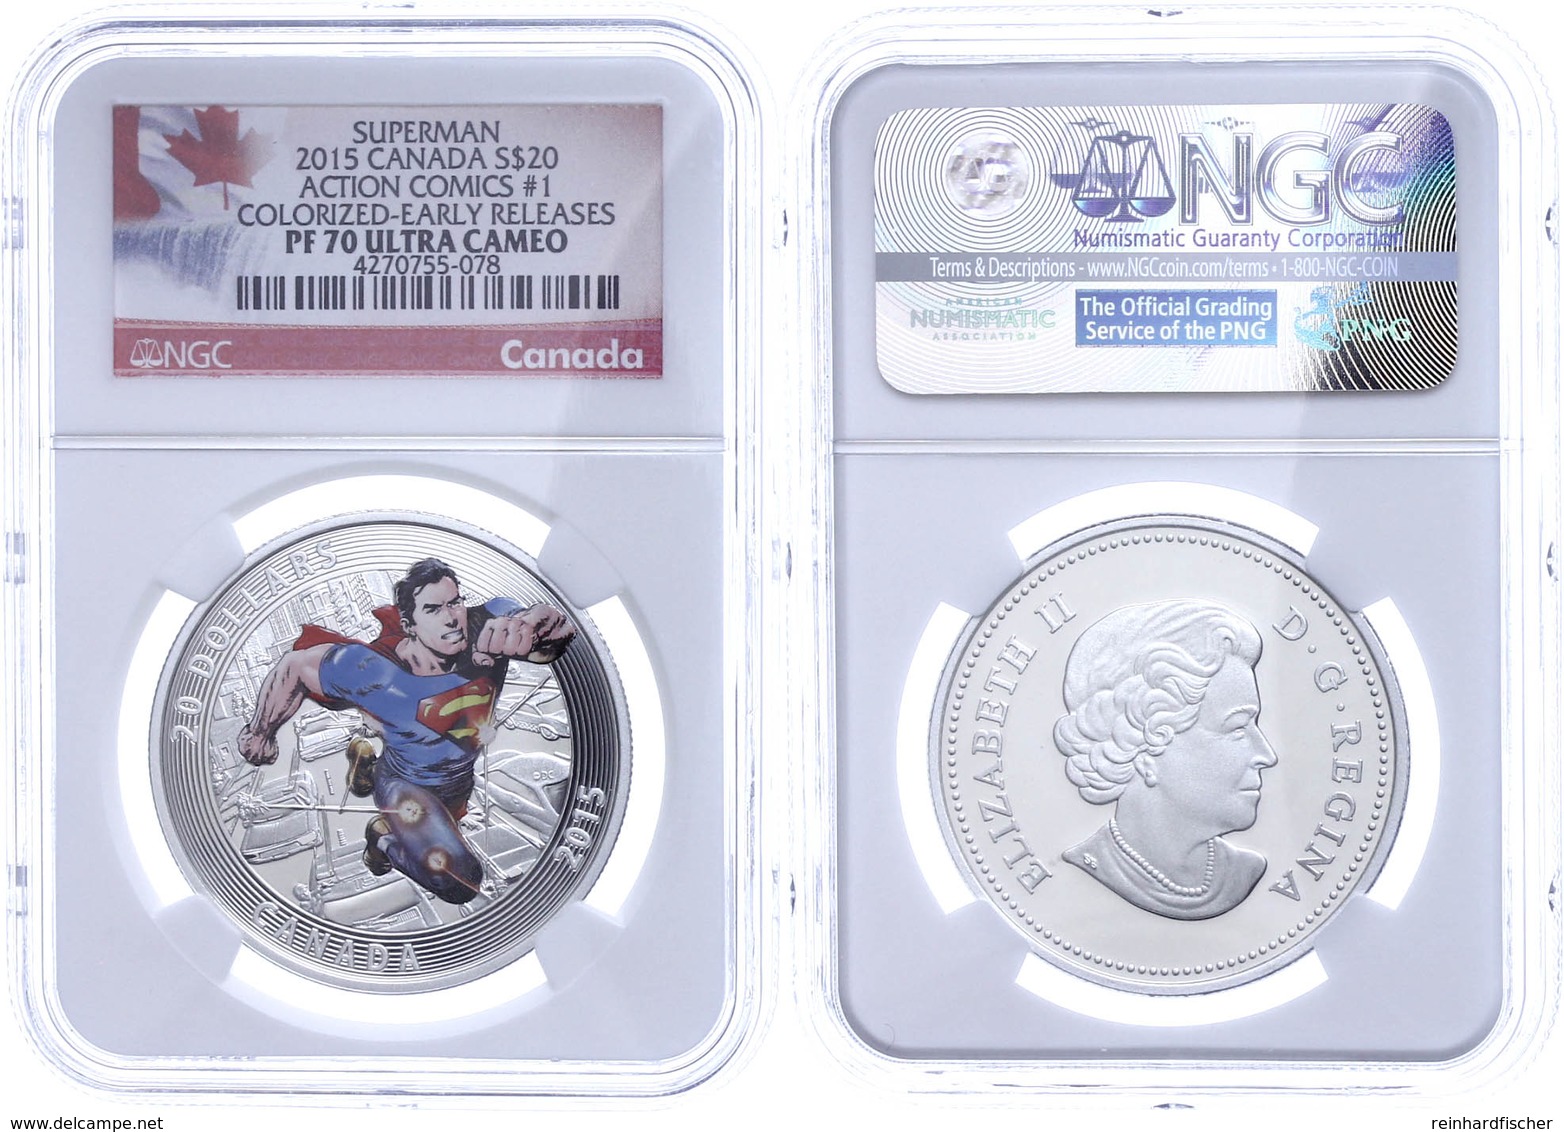 20 Dollars, 2015, Superman-Action Comics #1, In Slab Der NGC Mit Der Bewertung PF 70 Ultra Cameo, Colored Early Releases - Canada